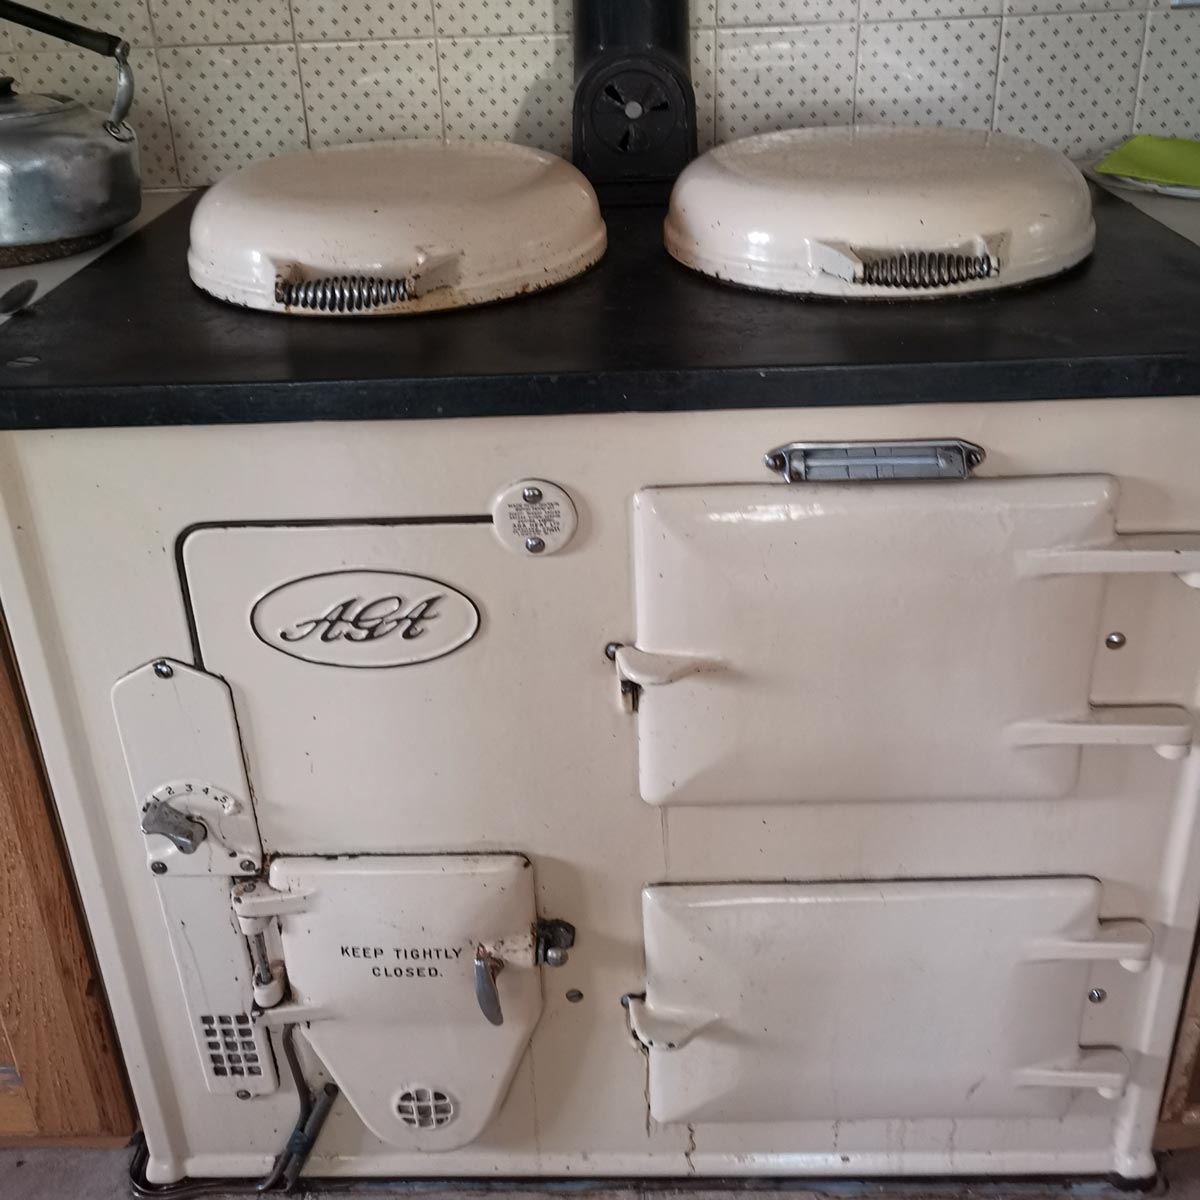 The hunt for Britain's oldest Aga